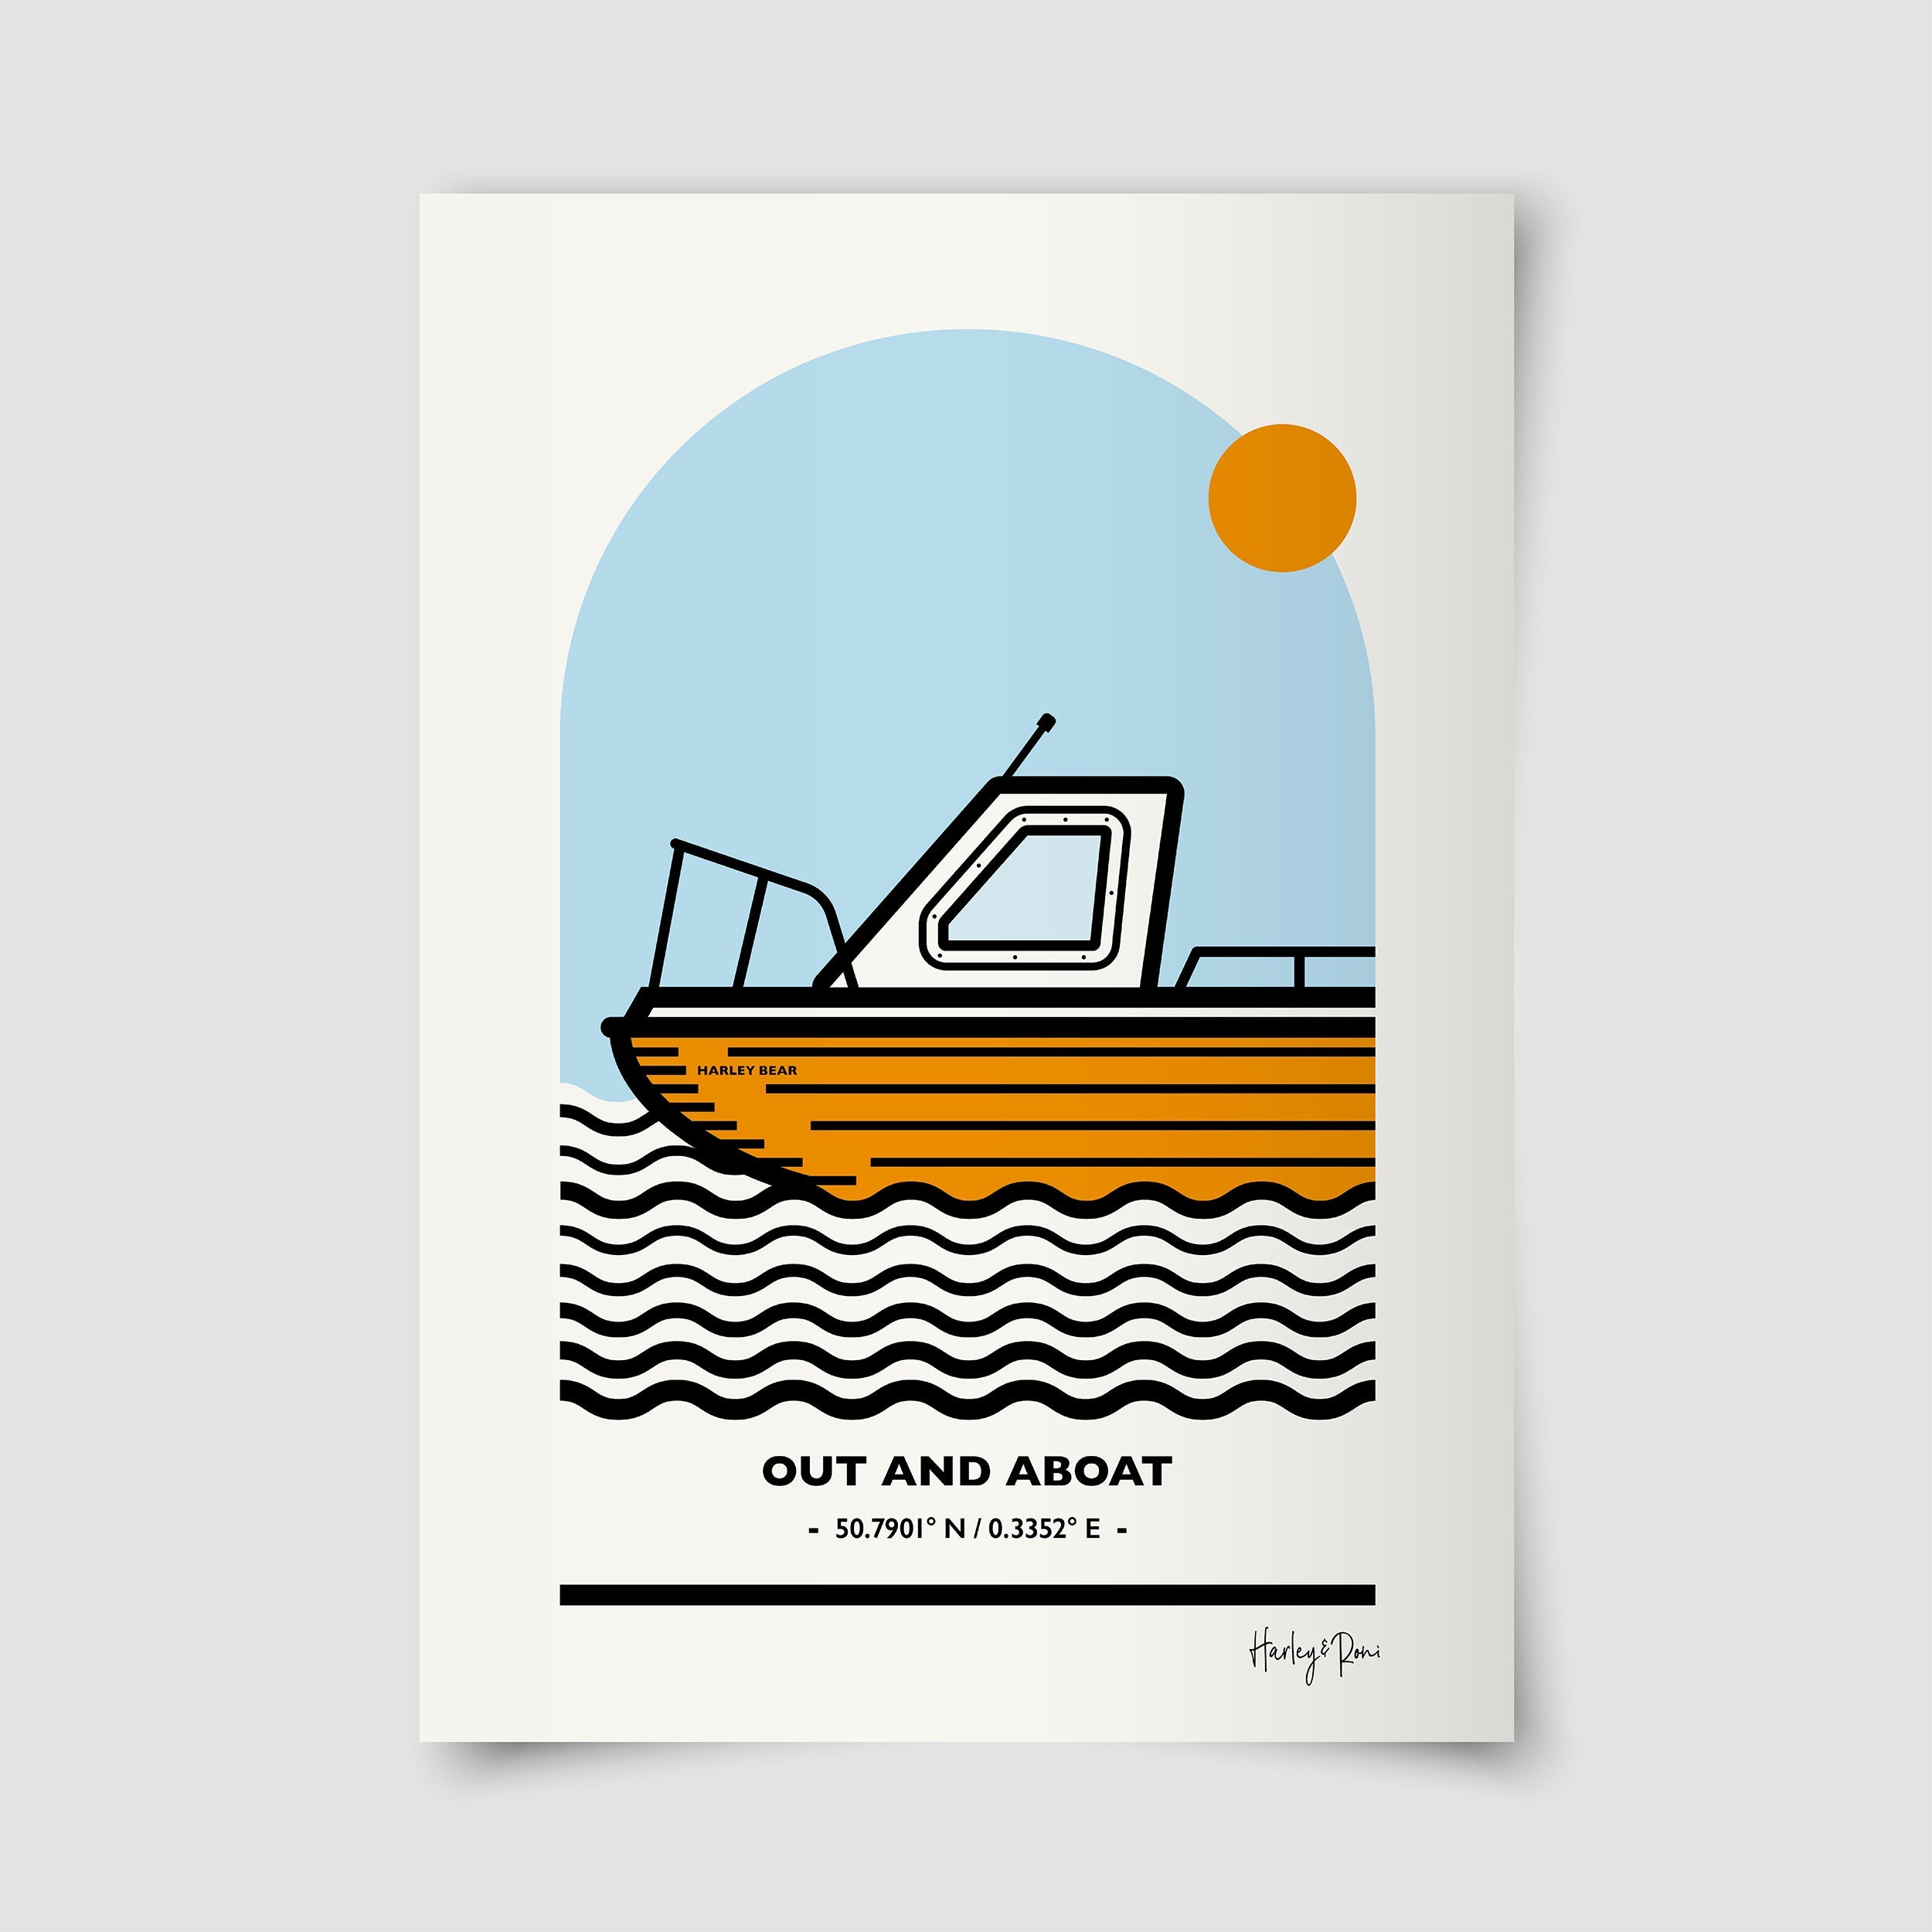 "OUT AND ABOAT" EASTBOURNE GICLÉE PRINT